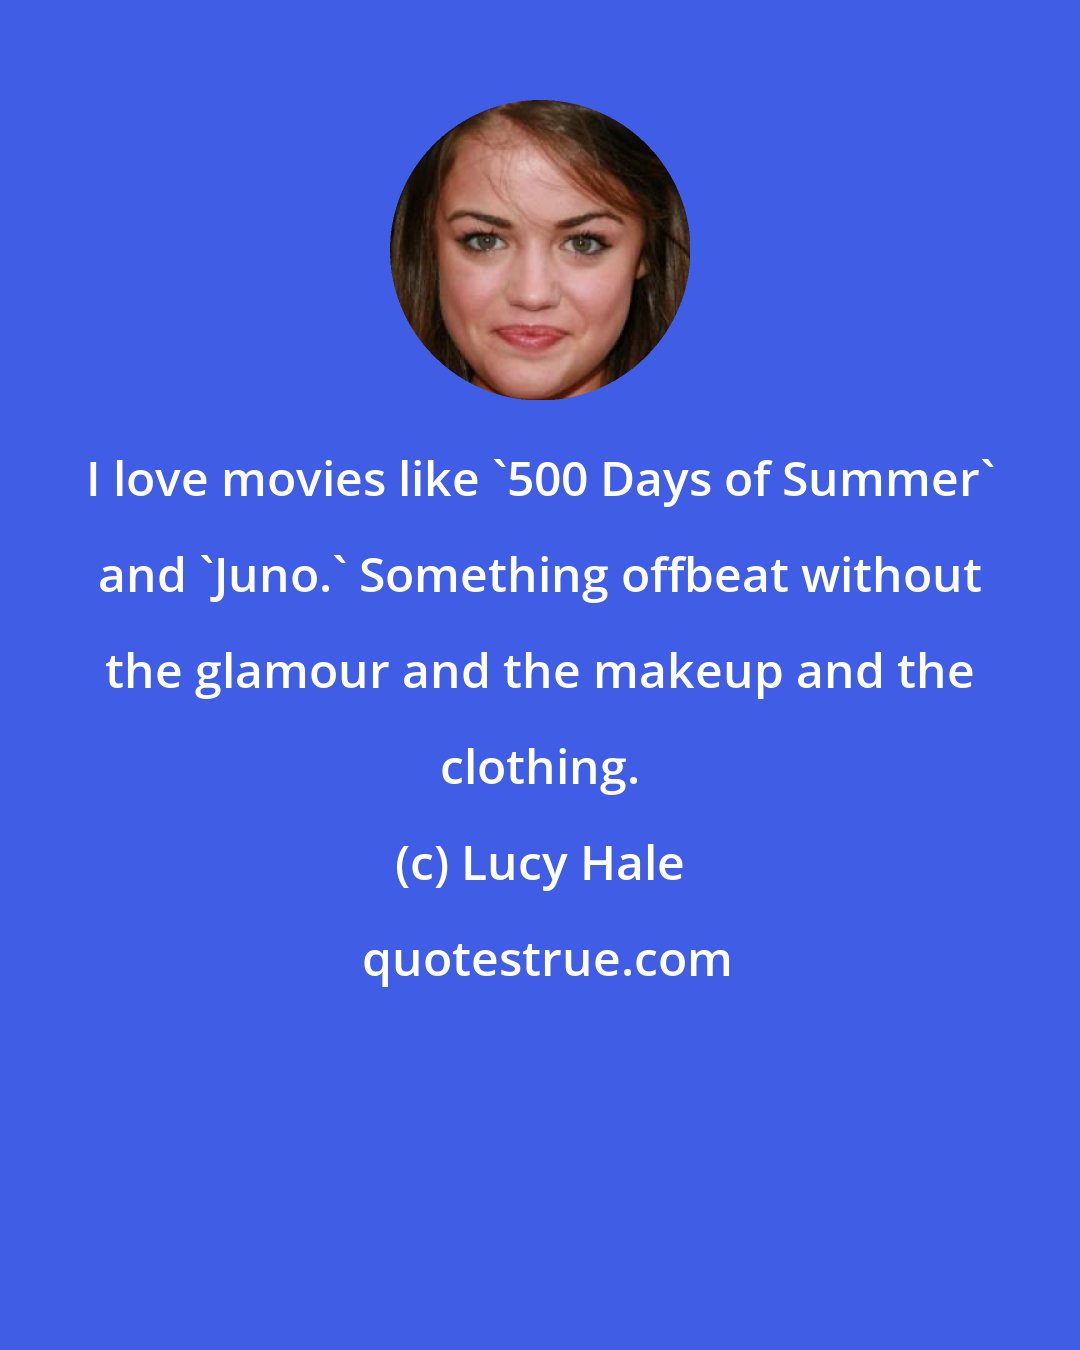 Lucy Hale: I love movies like '500 Days of Summer' and 'Juno.' Something offbeat without the glamour and the makeup and the clothing.